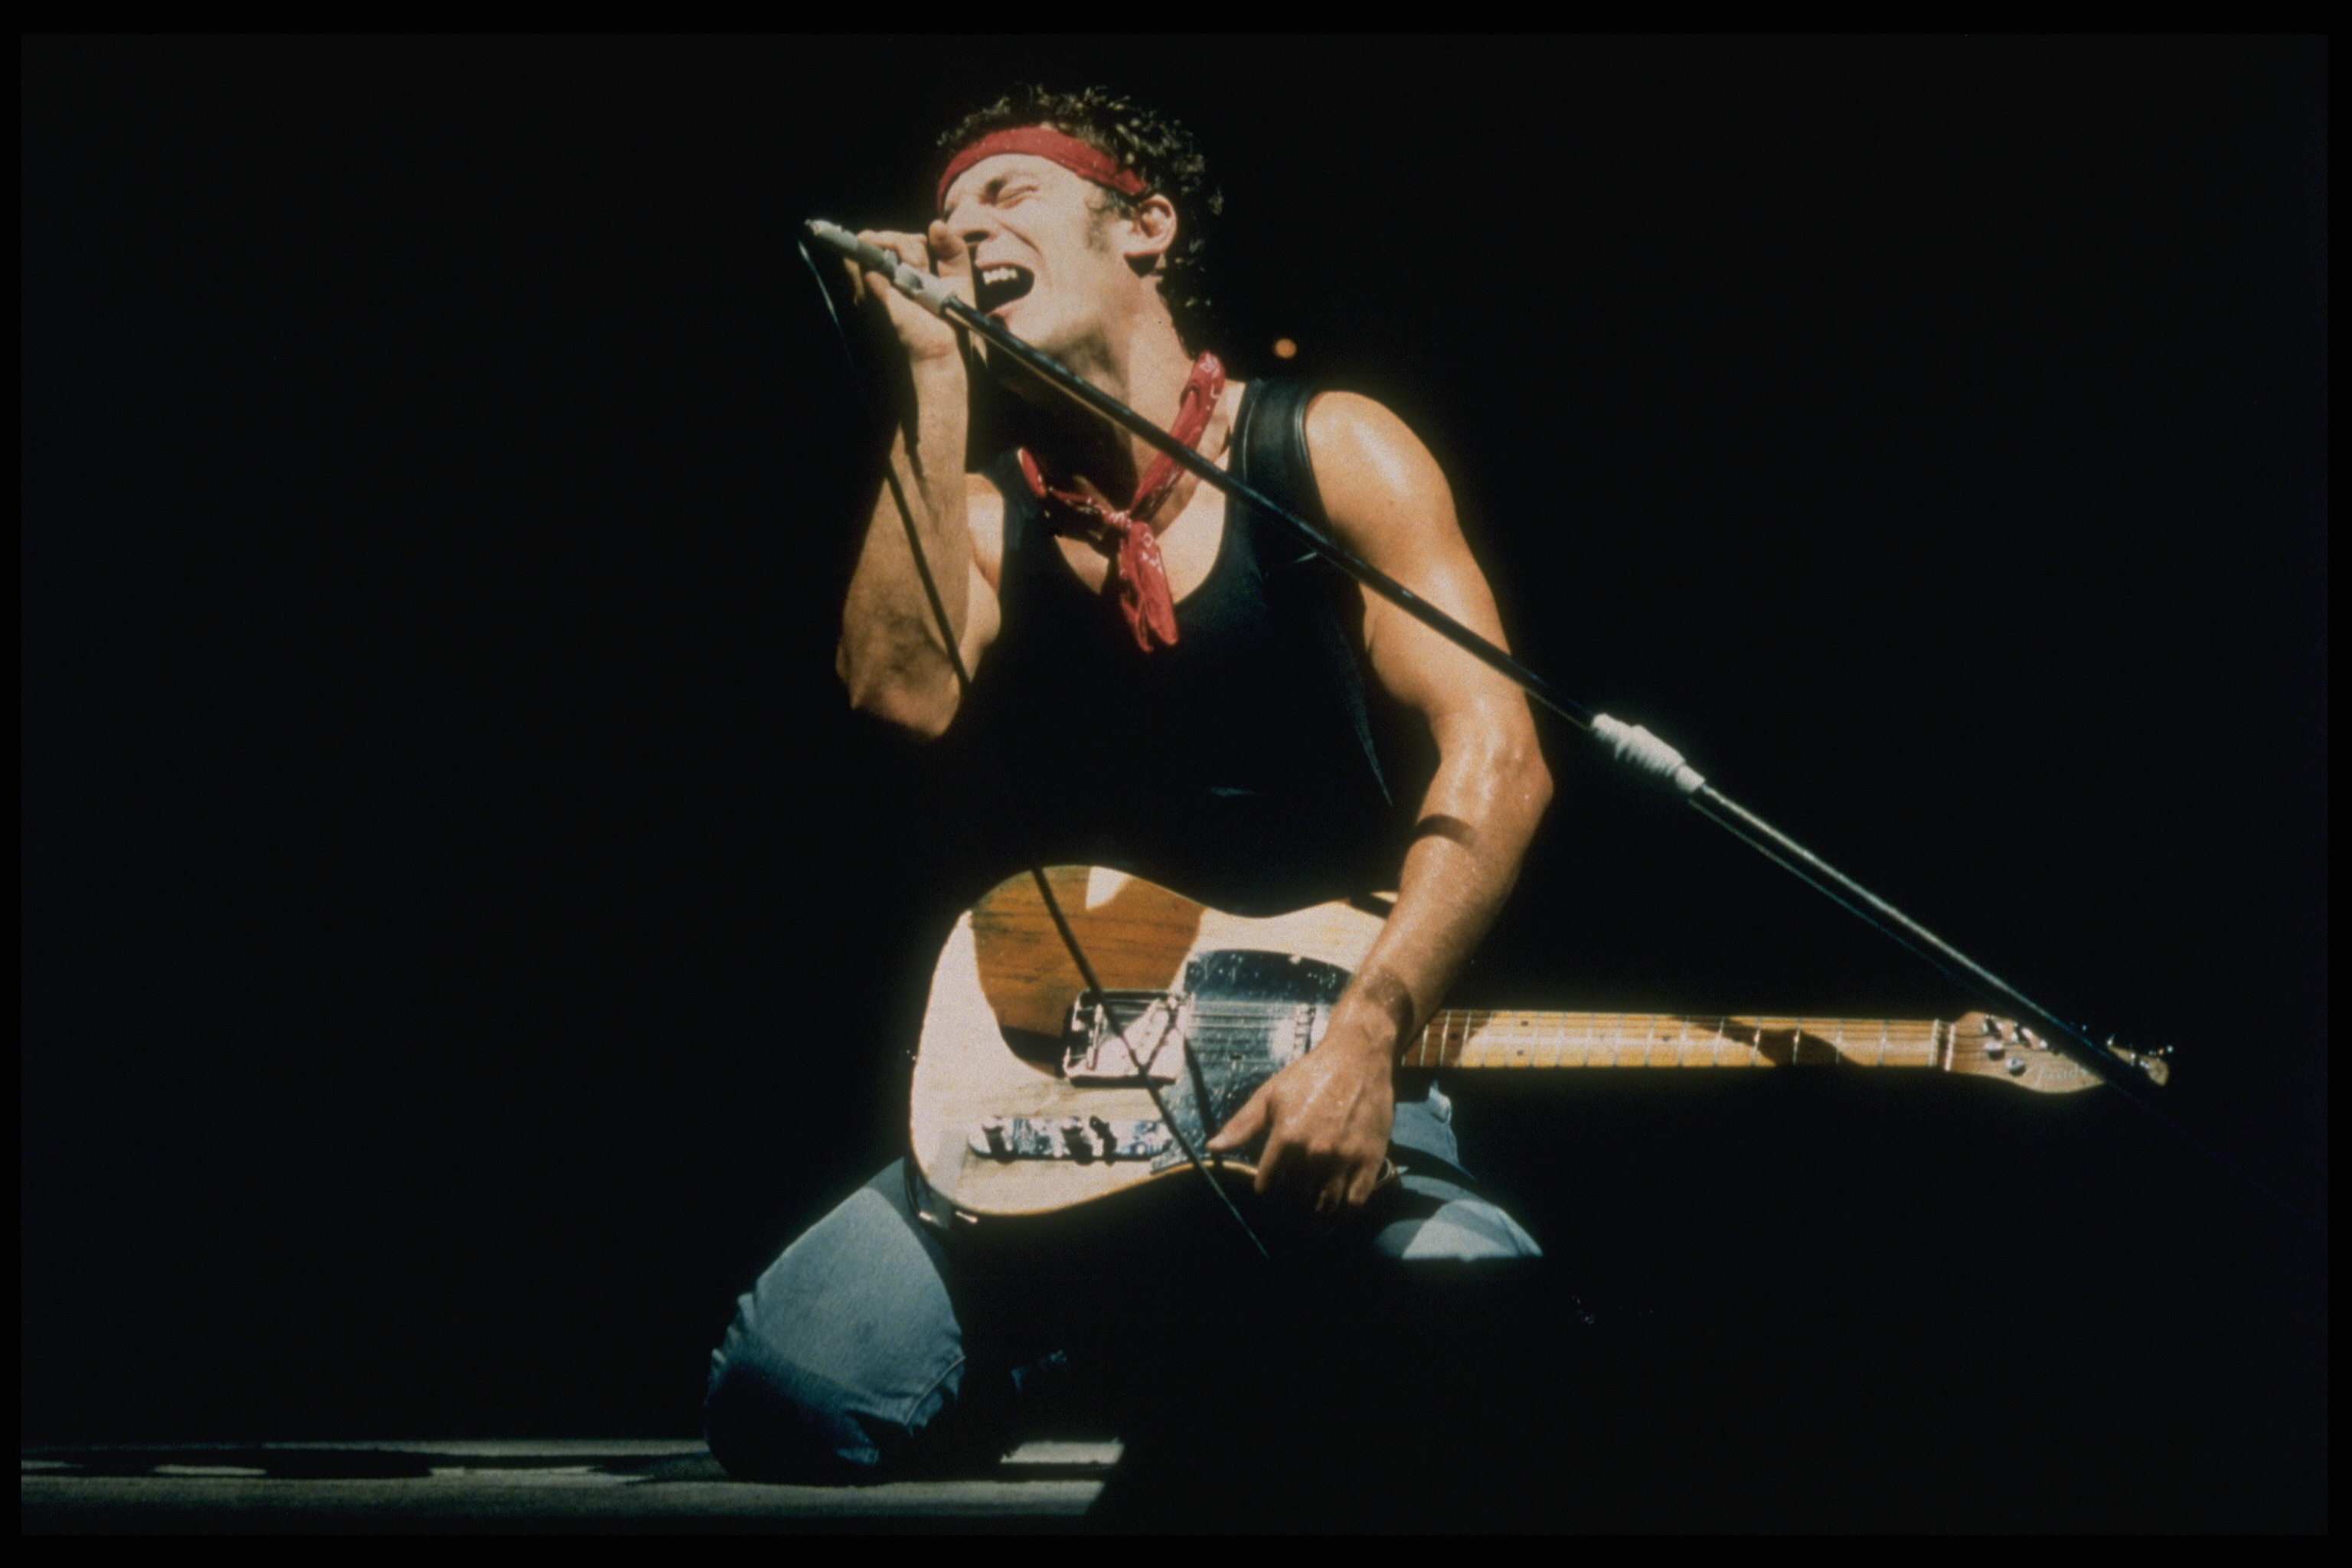 Bruce Springsteen performing on stage in 1994 | Source: Getty Images